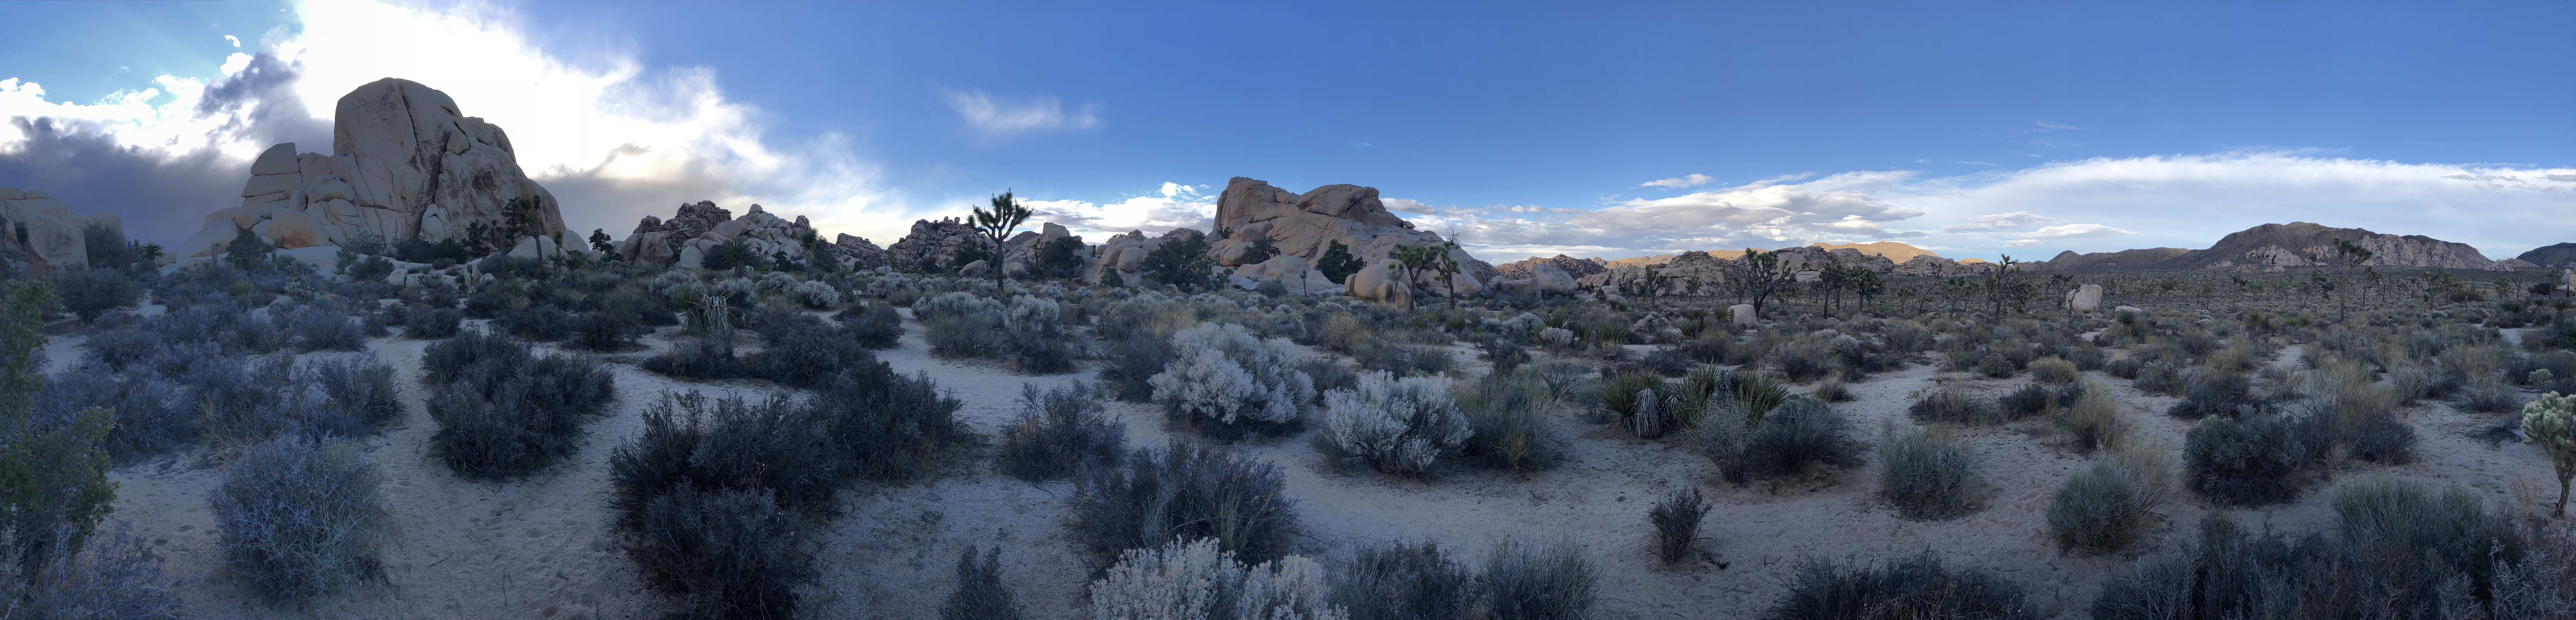 a view of a desert in Joshua Tree National Park